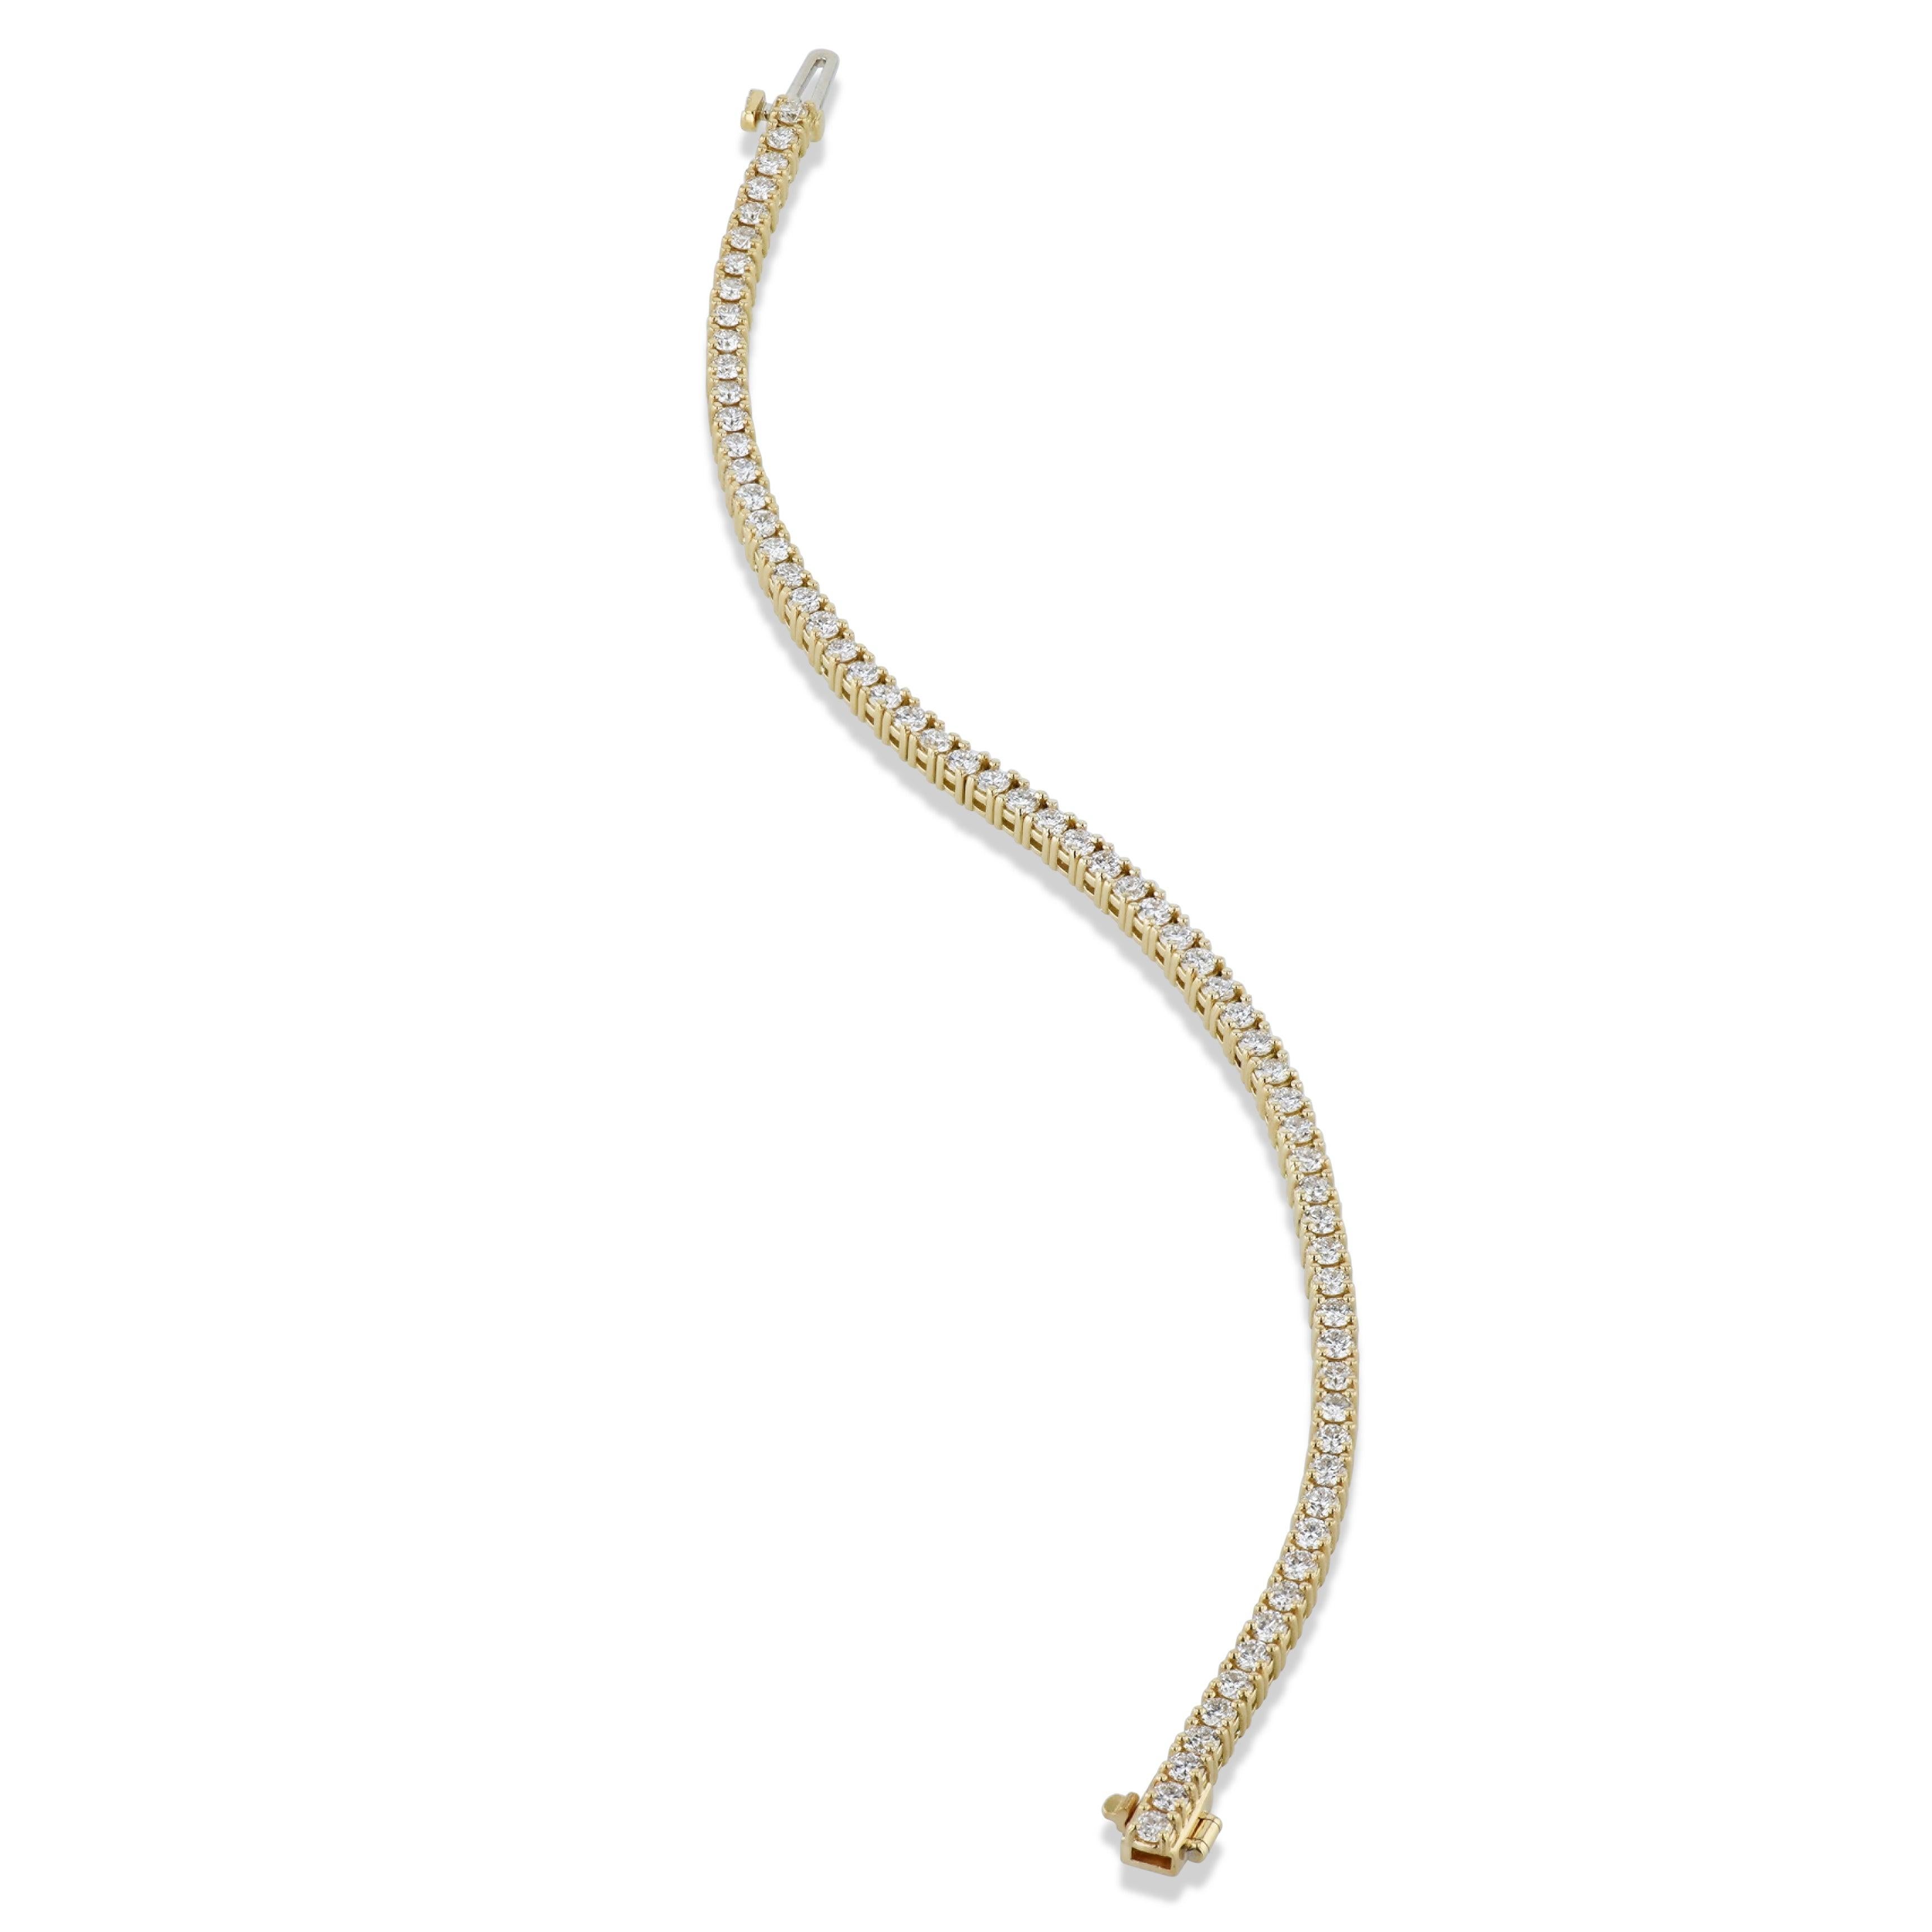 This exquisite 18K yellow gold tennis bracelet features 65 stunning diamonds totaling 3.34 carats. Handcrafted to perfection, this is the perfect choice from H&H Collection.
Diamond Yellow Gold Tennis Bracelet
18kt Yellow Gold
Tennis